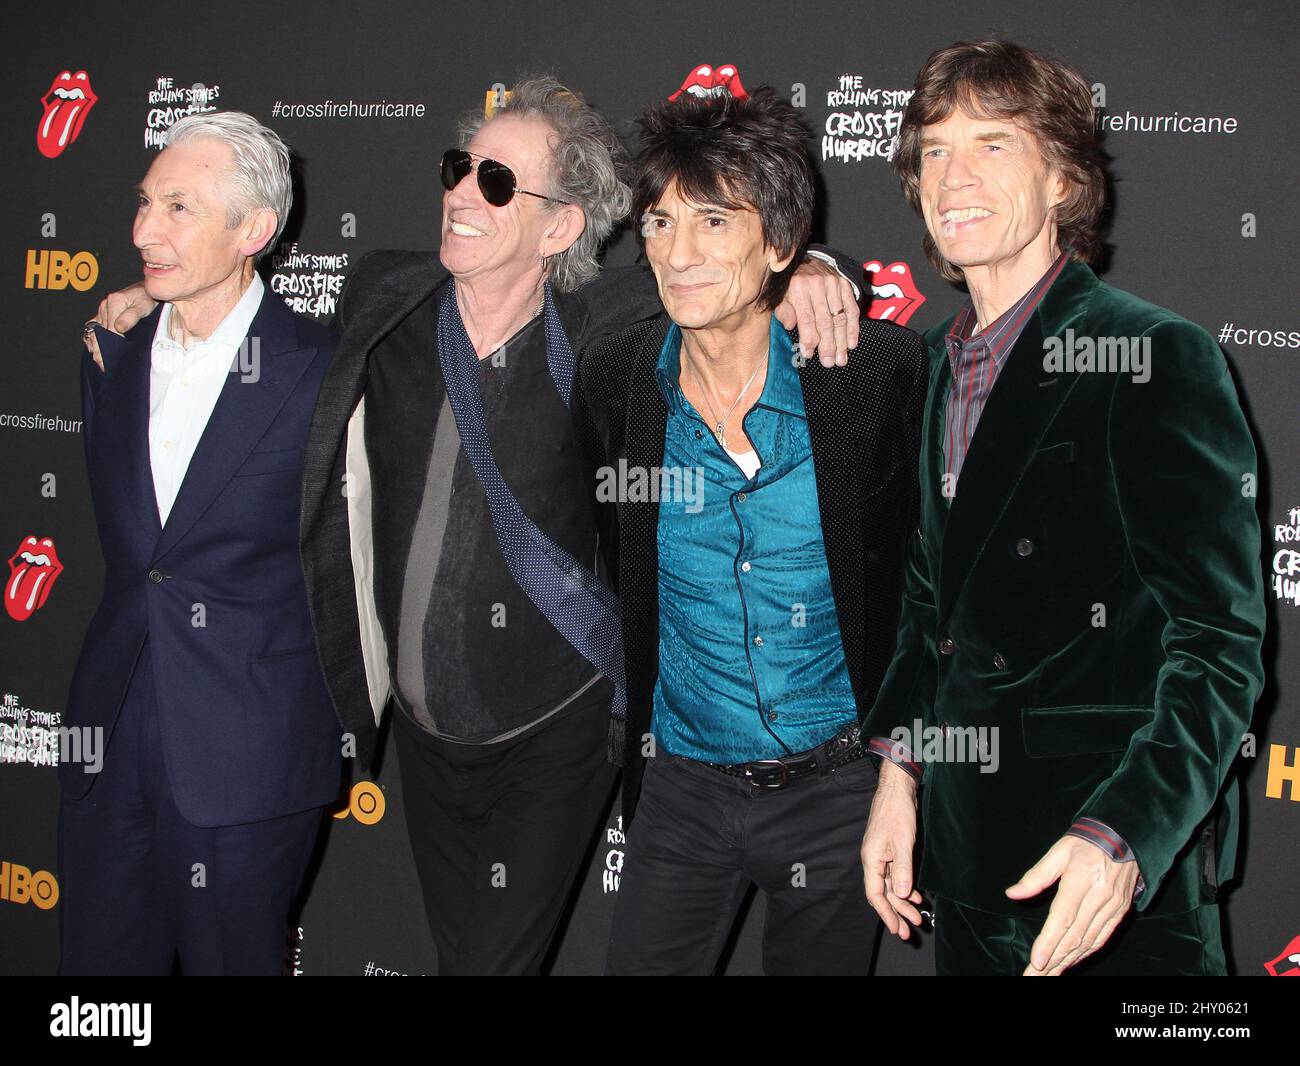 Charlie Watts, Ronnie Wood, Keith Richards and Mick Jagger attending a screening of 'Crossfire Hurricane' at the Ziegfeld Theater in New York City. Stock Photo